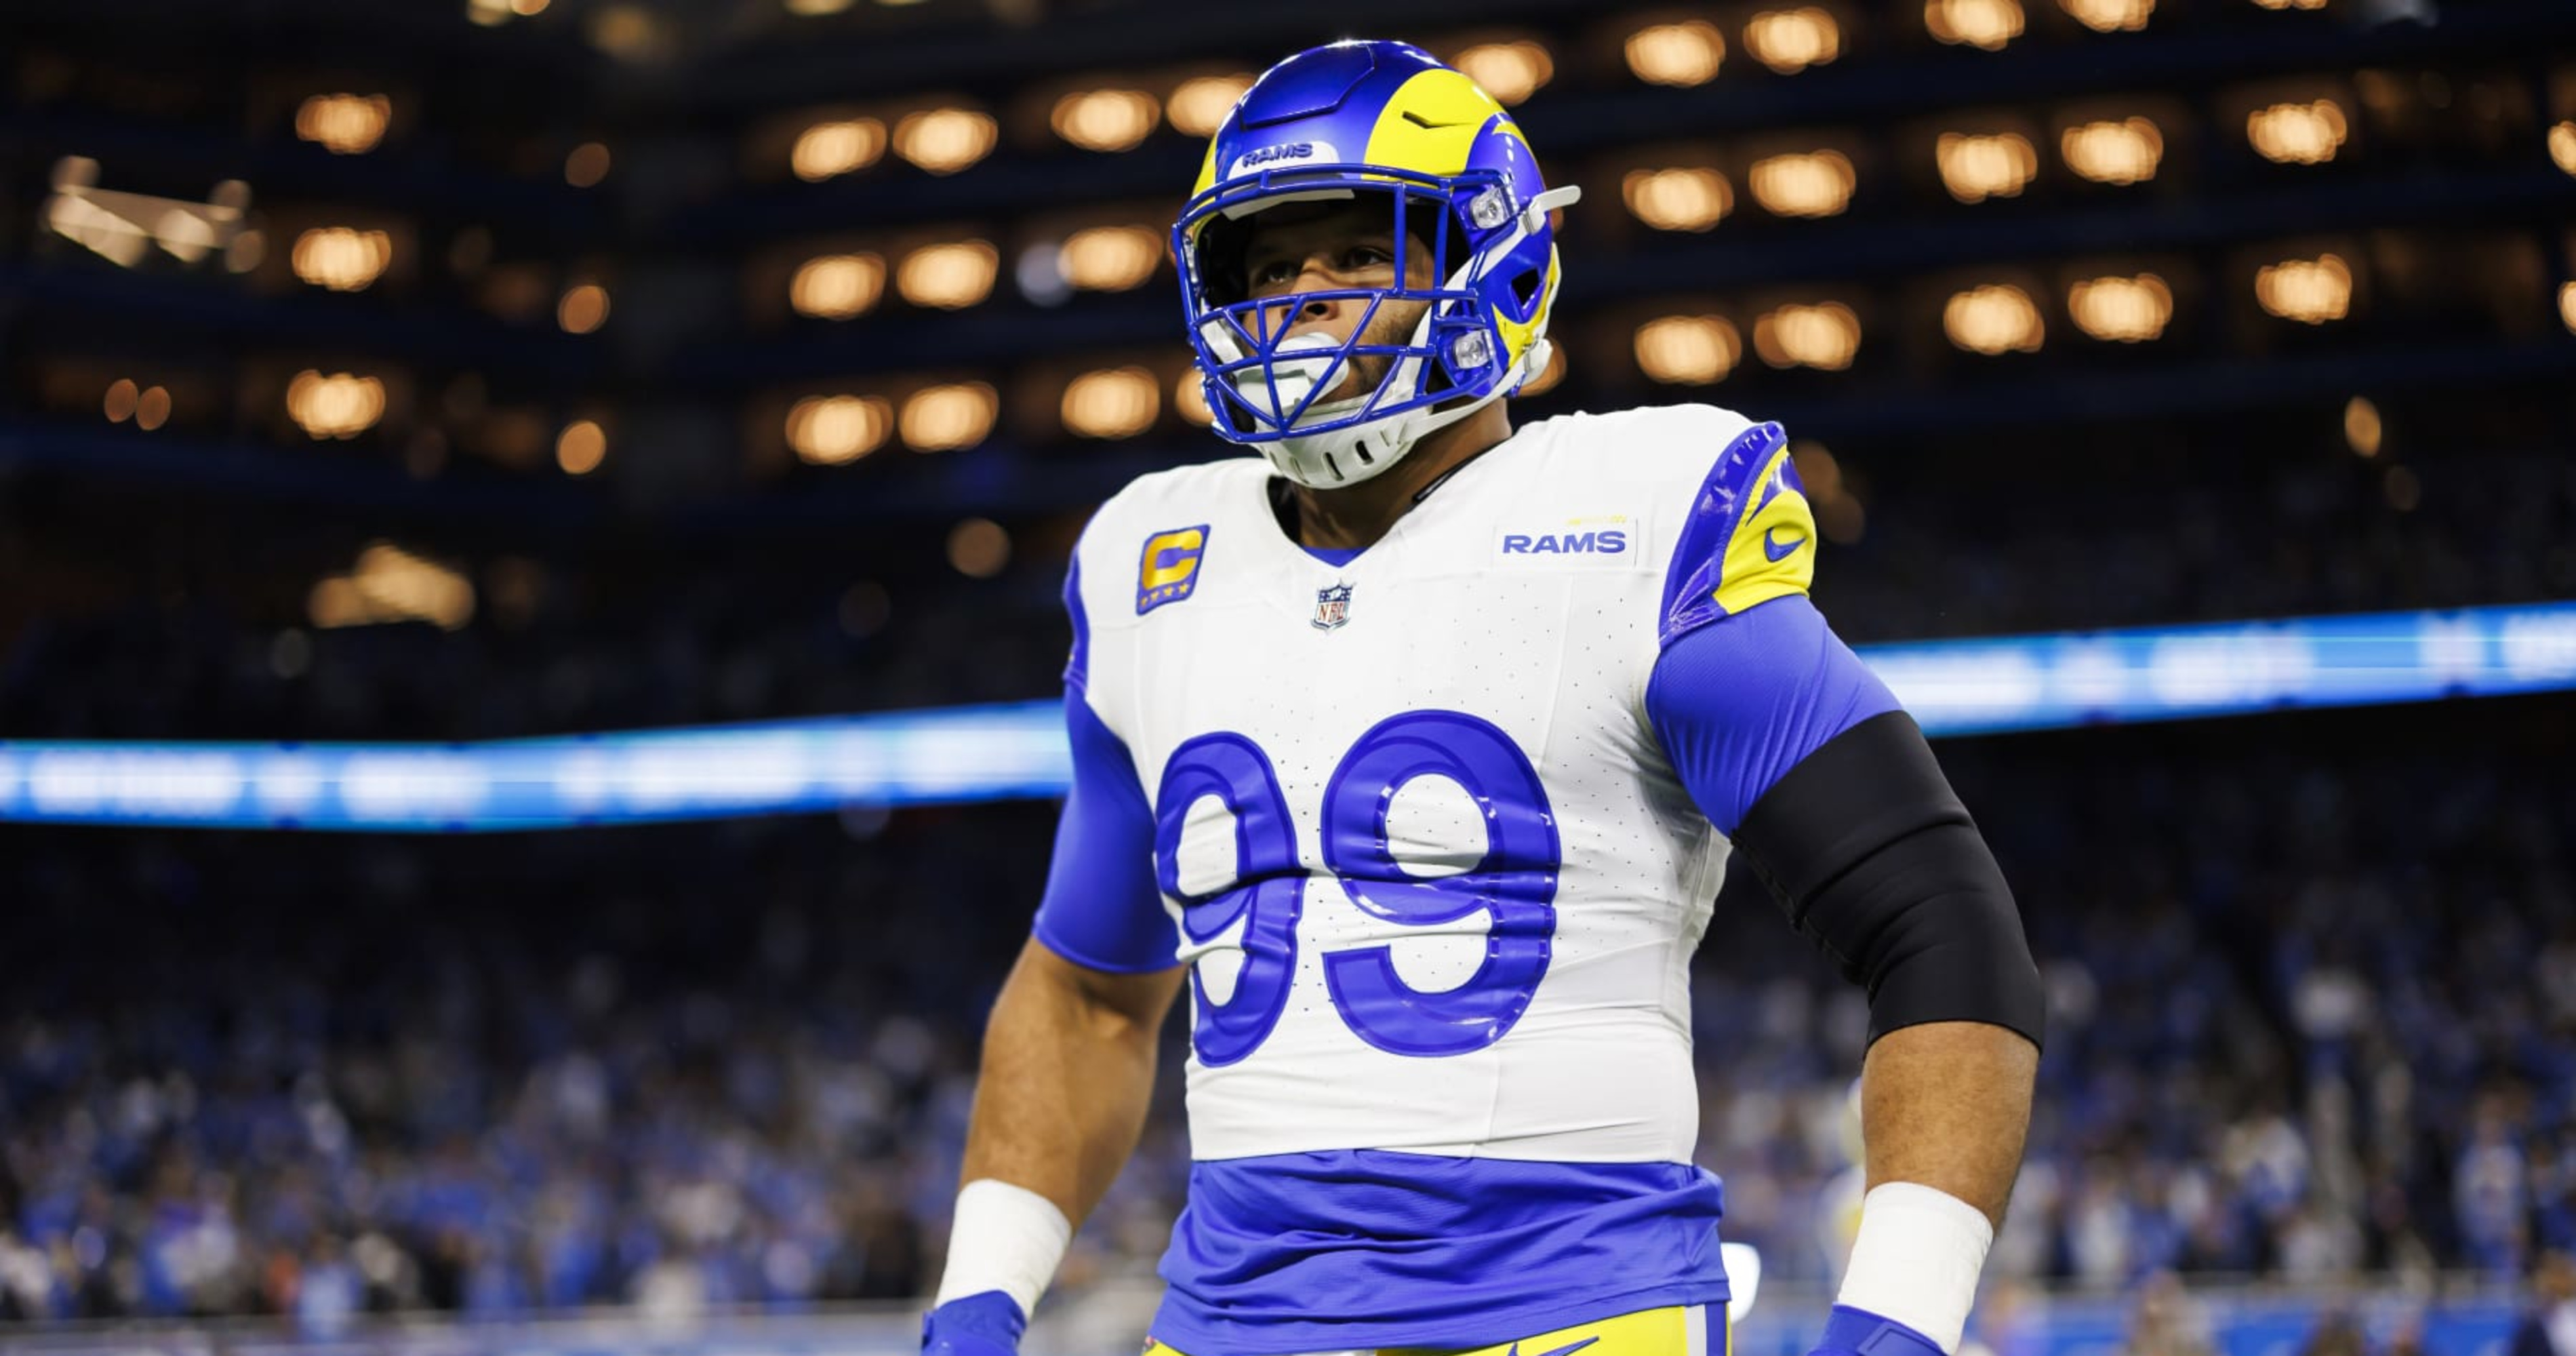 Aaron Donald Officially Placed on Reserve List by Rams After NFL Retirement